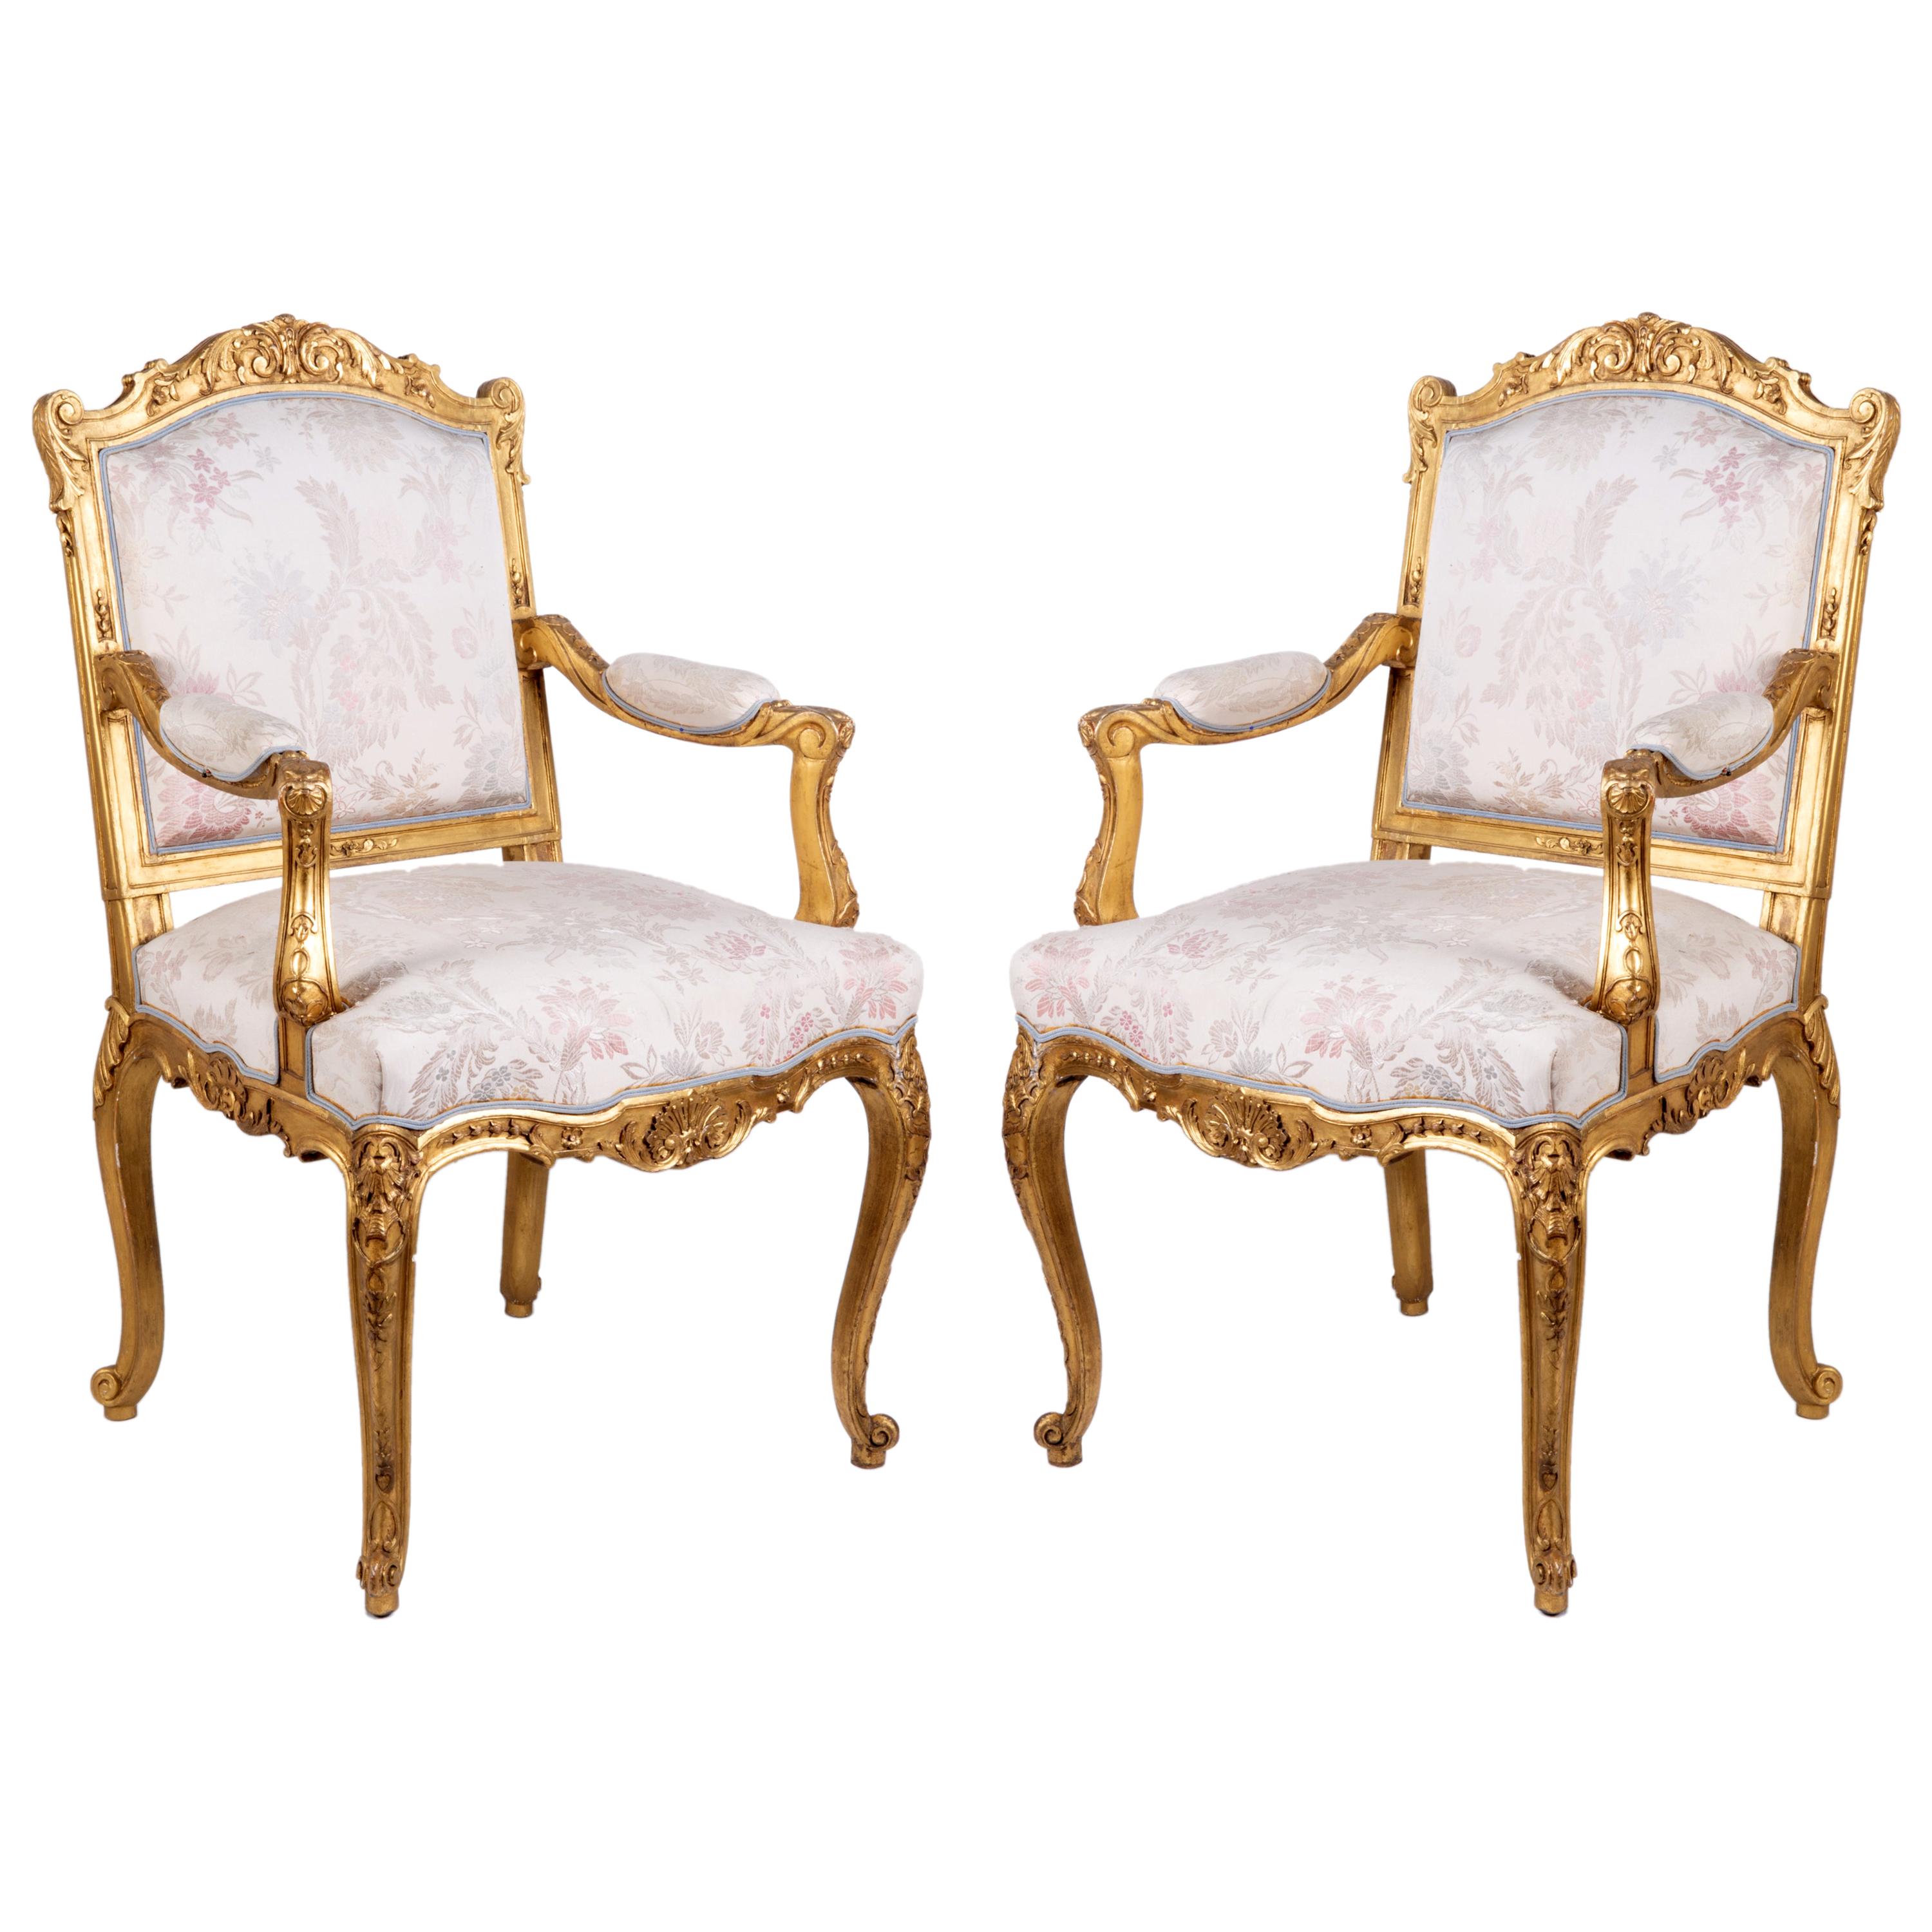 Pair of Louis XVI Style Gilded Armchairs by 'Mellier'